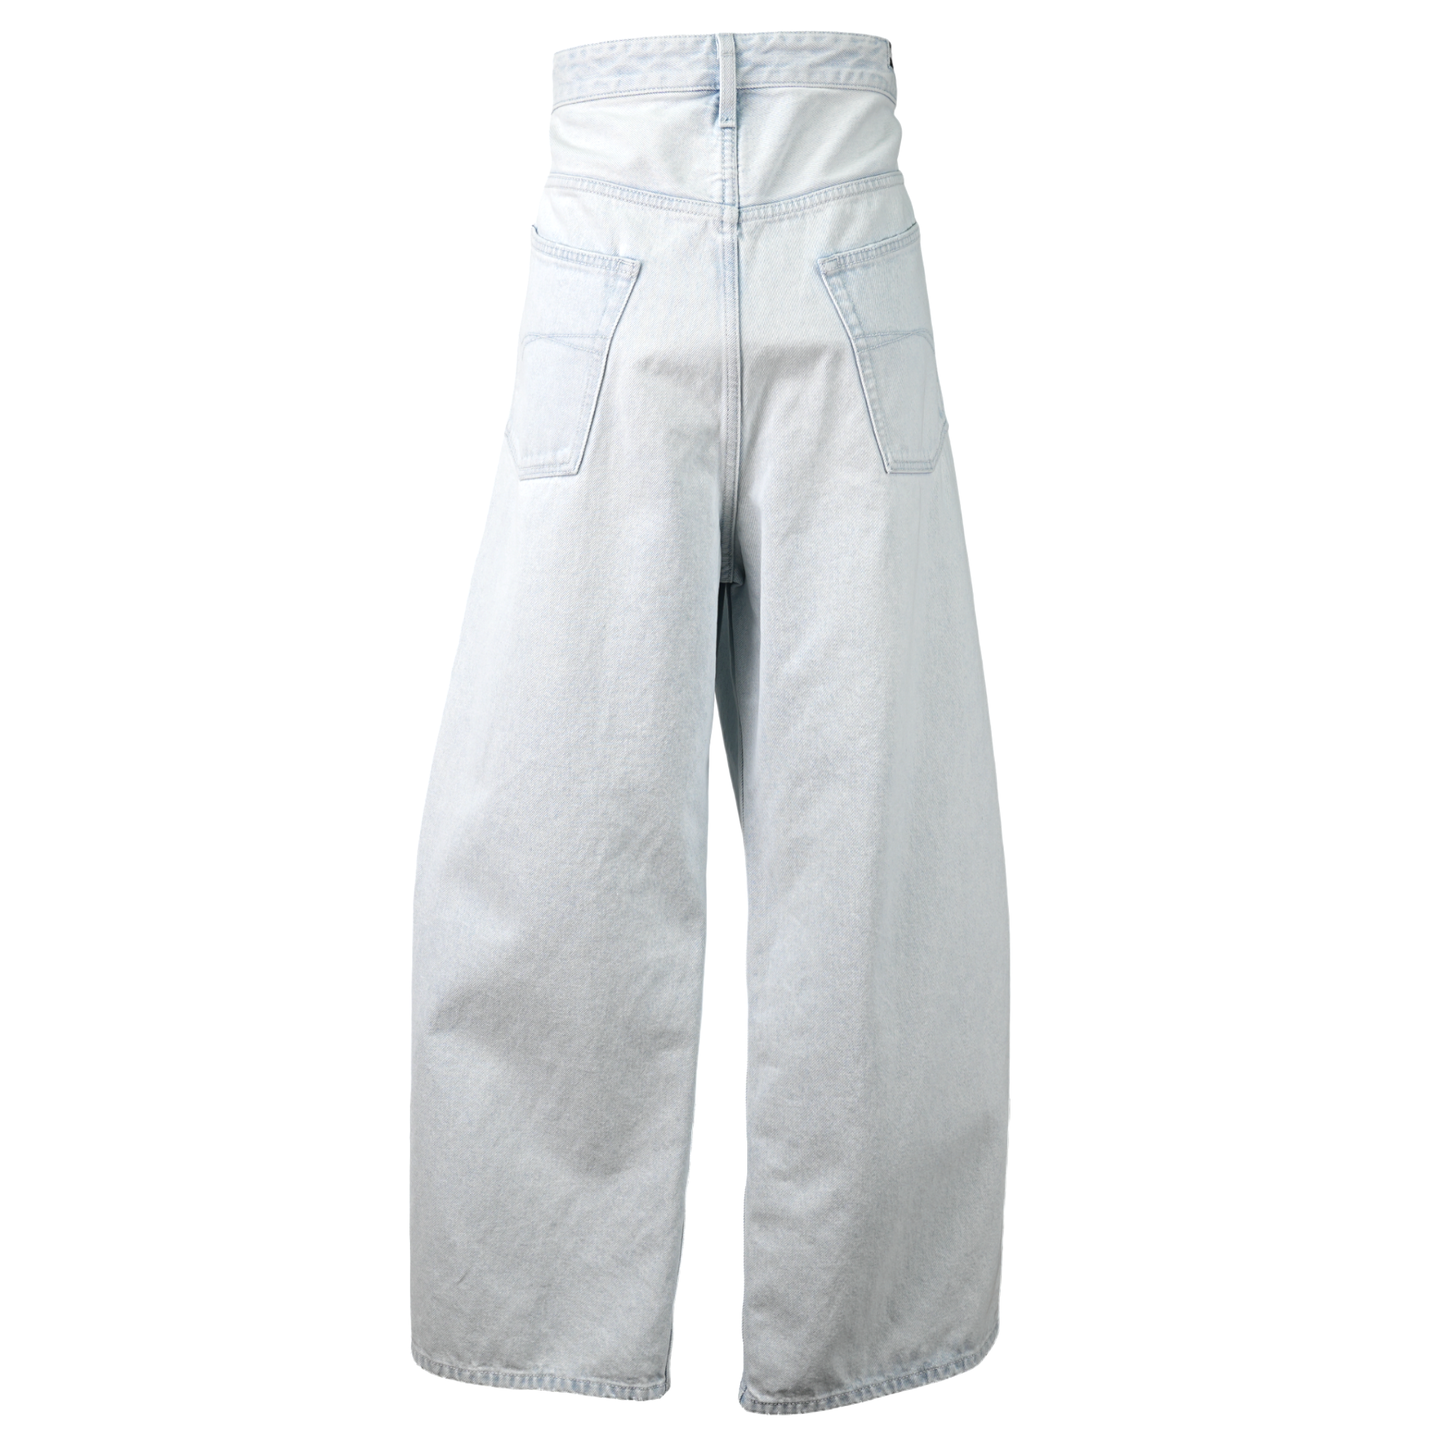 "EXCLUSIVE" OVERSIZED BAGGY PANTS / 3902:HEAVY BLEACHED BLUE